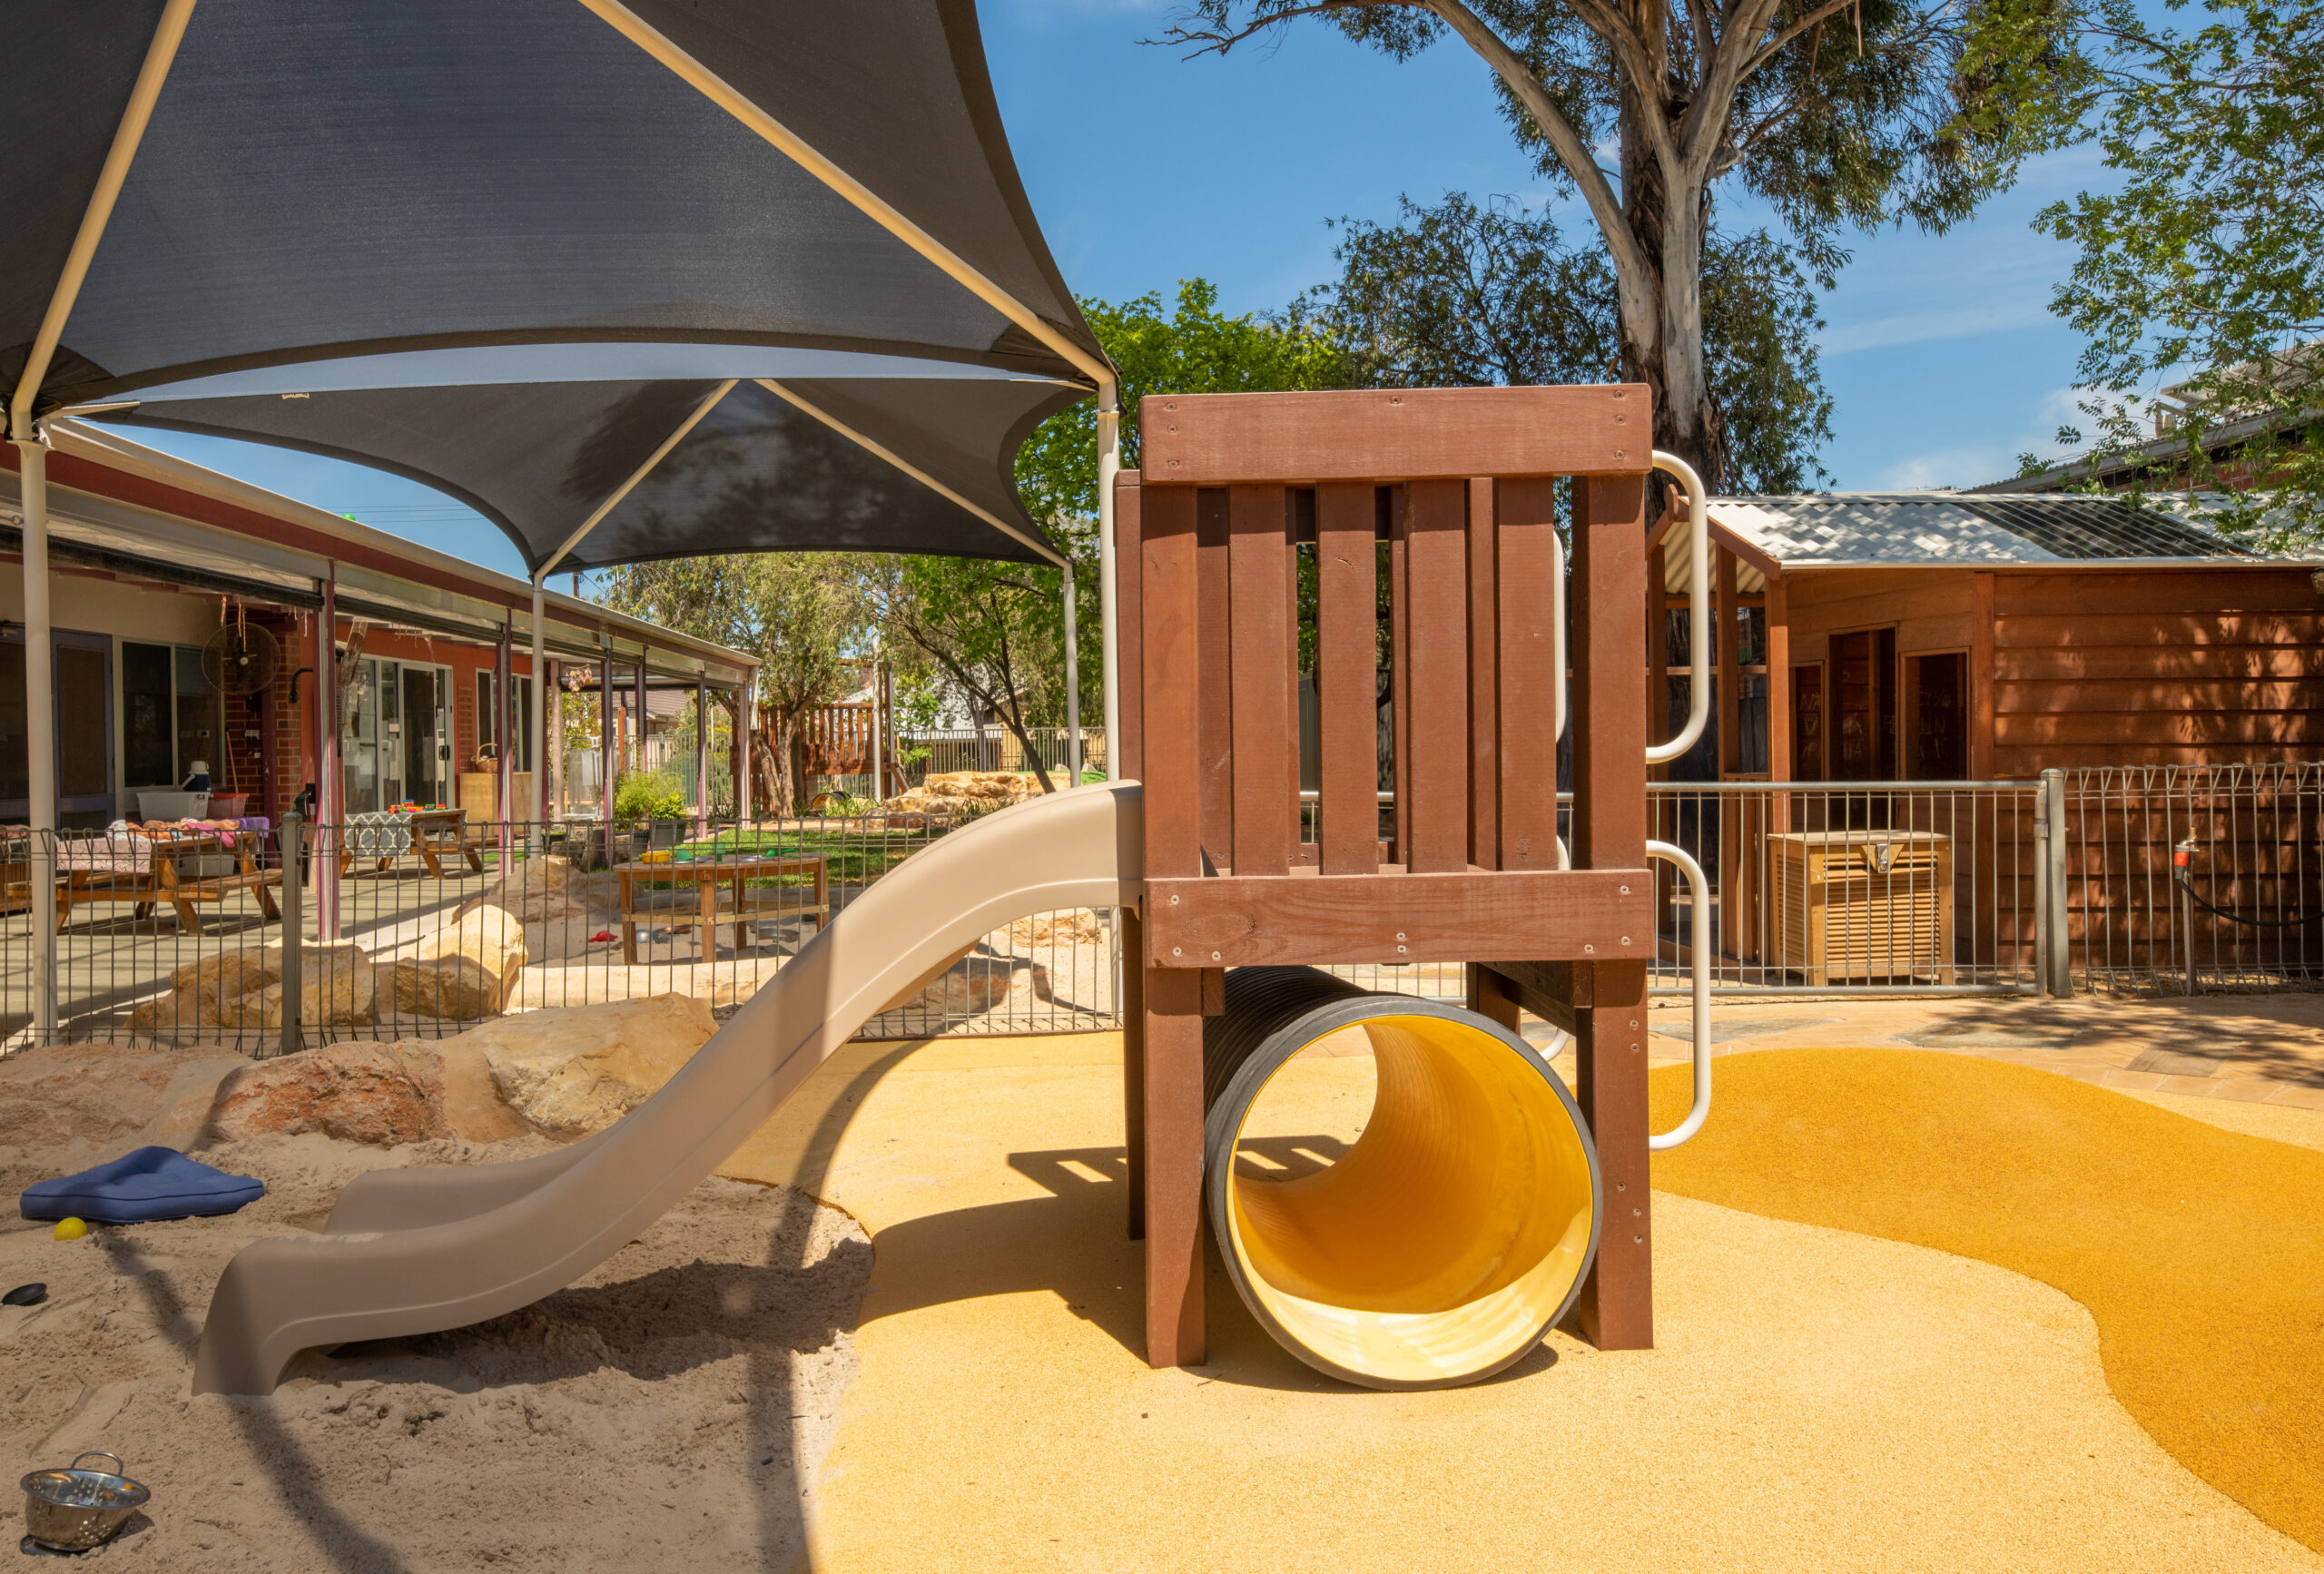 Slide, sandpit and tunnel in the babies room play yard